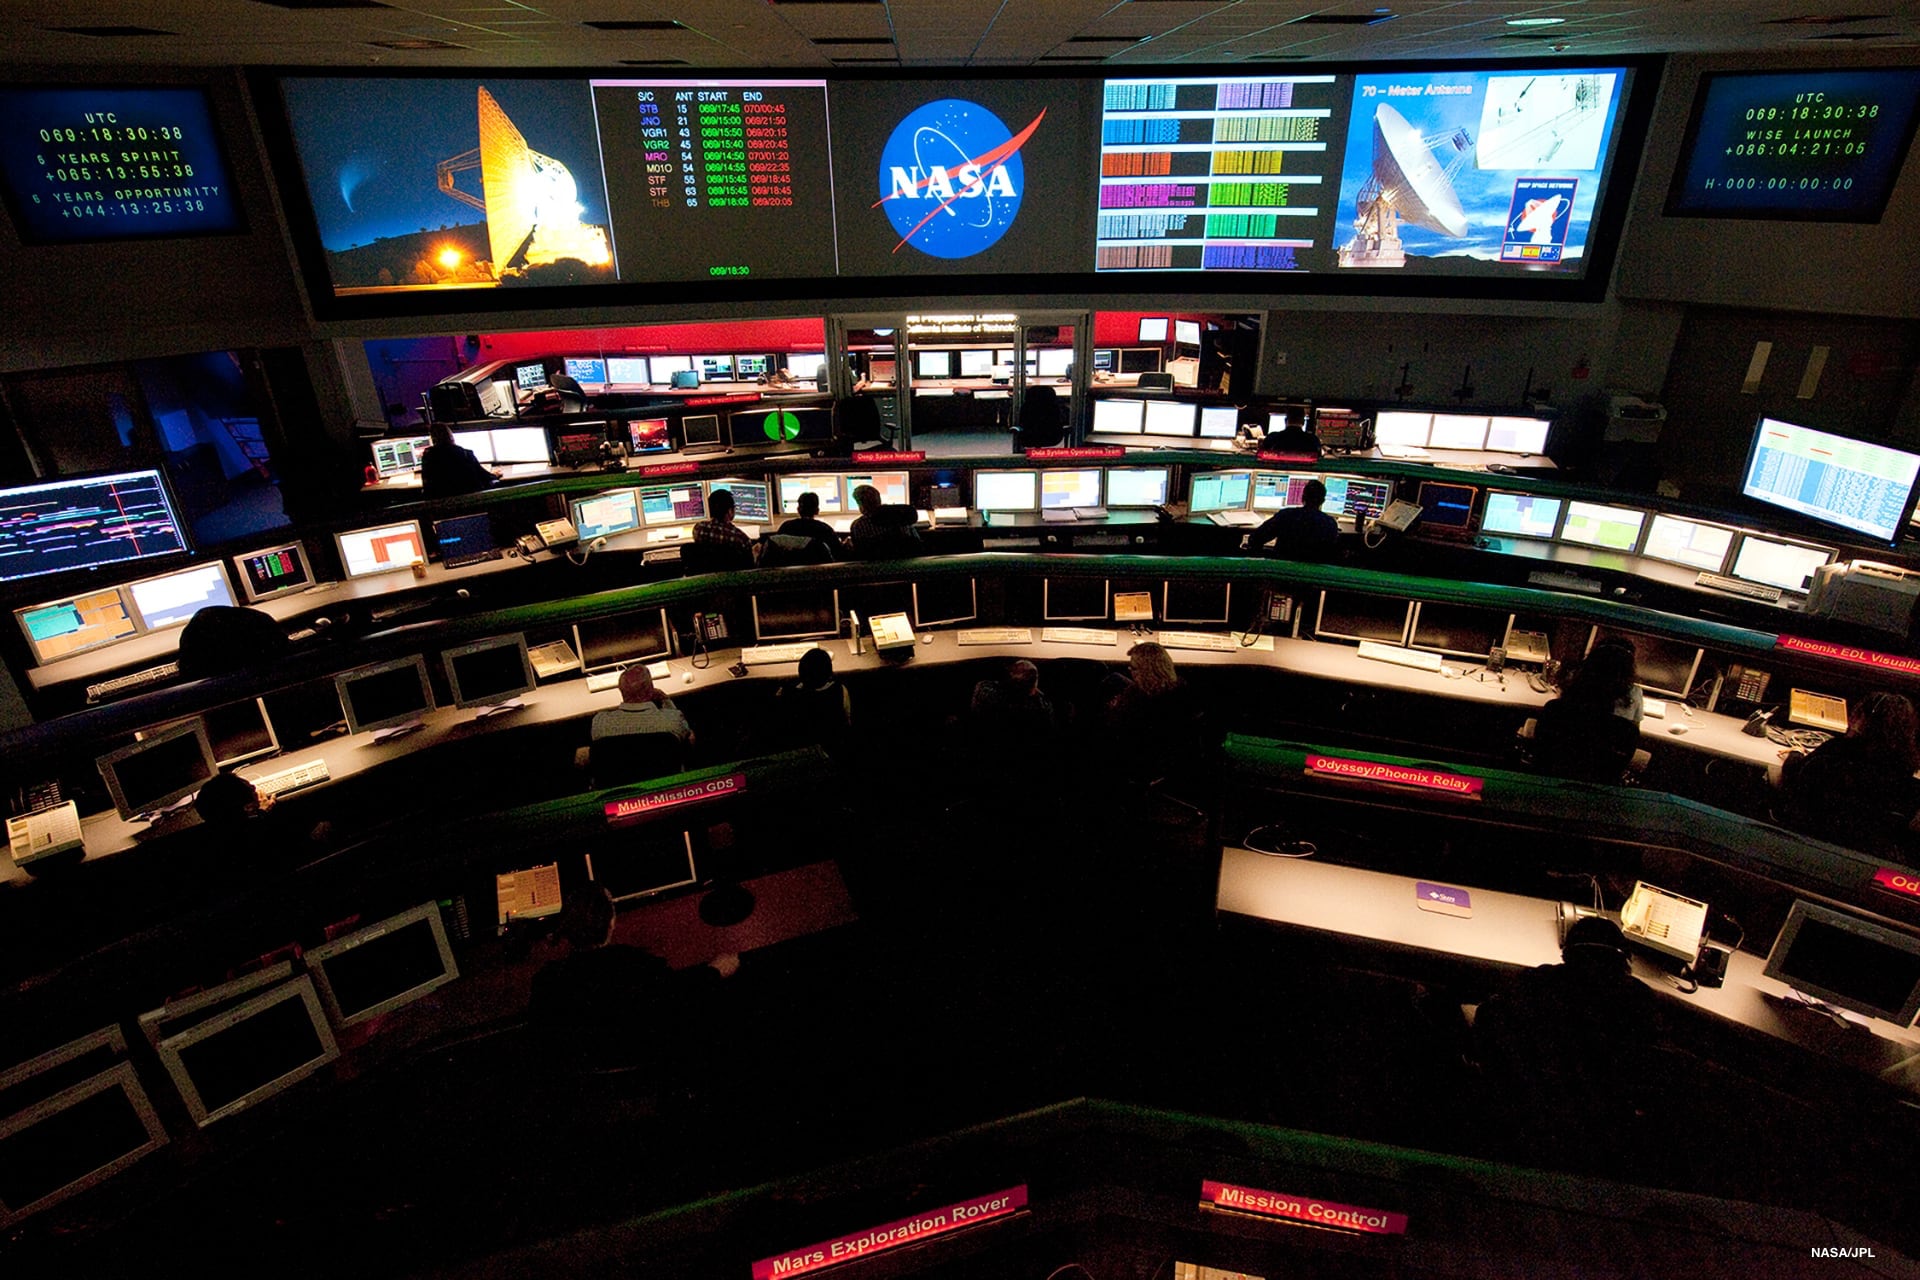 The Space Flight Operations Facility’s Mission Control room. Mission Control is kept dark at all times as a holdover from when air conditioning systems were unable to ward off the heat from supercomputers. Image credit: NASA/JPL